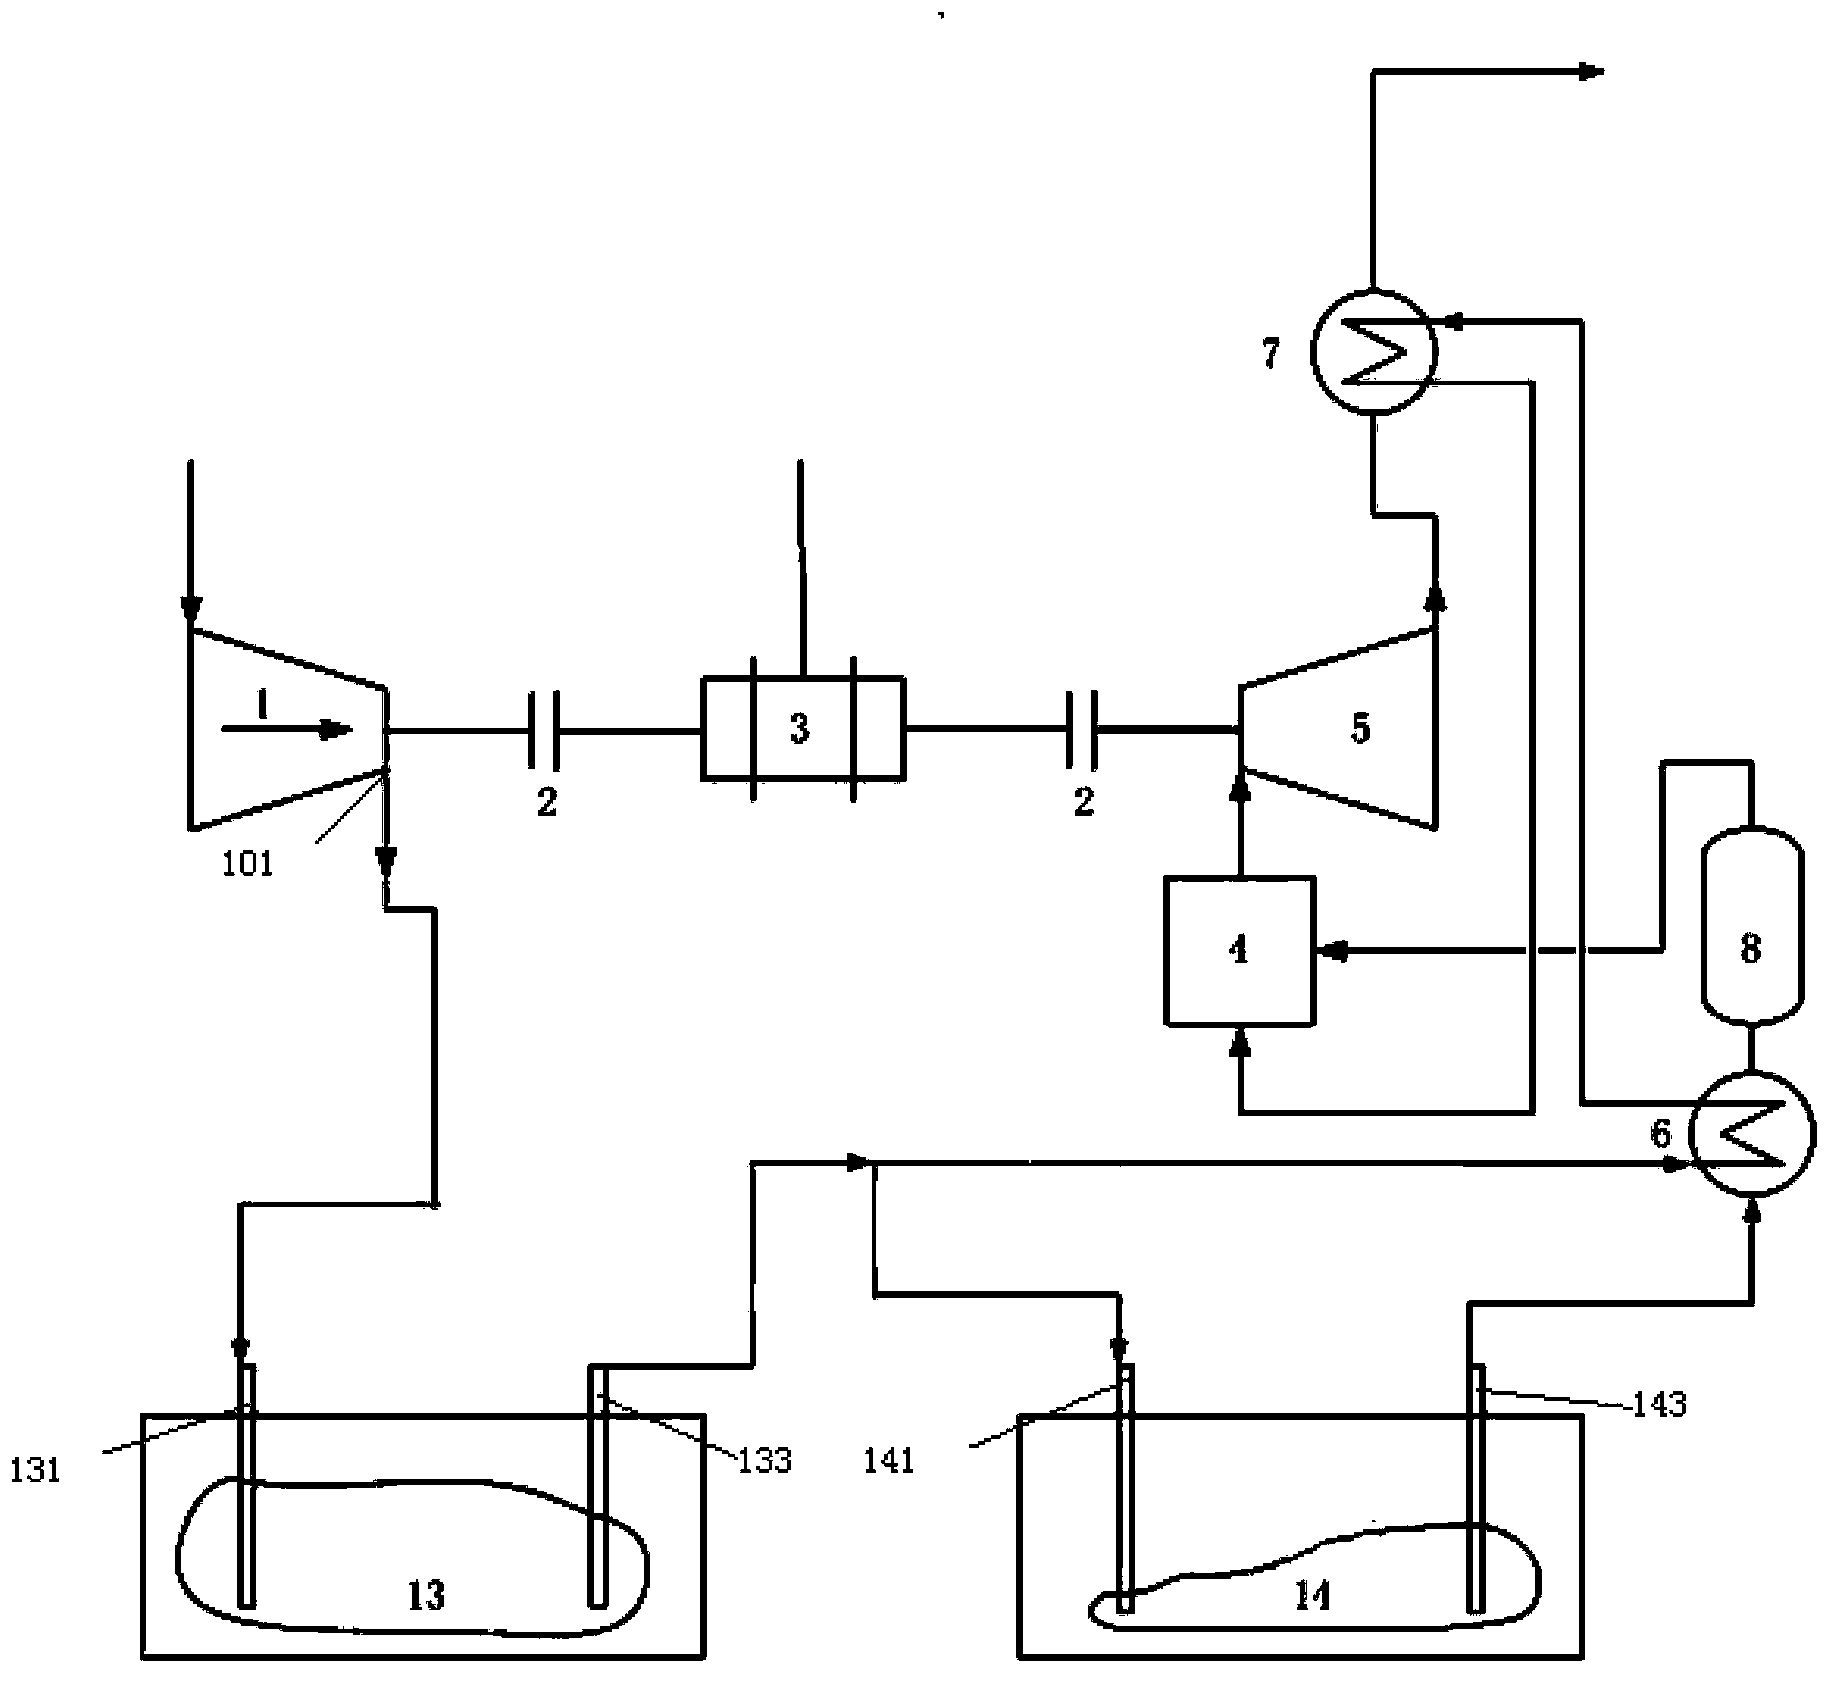 Electricity generating method and electricity generating system